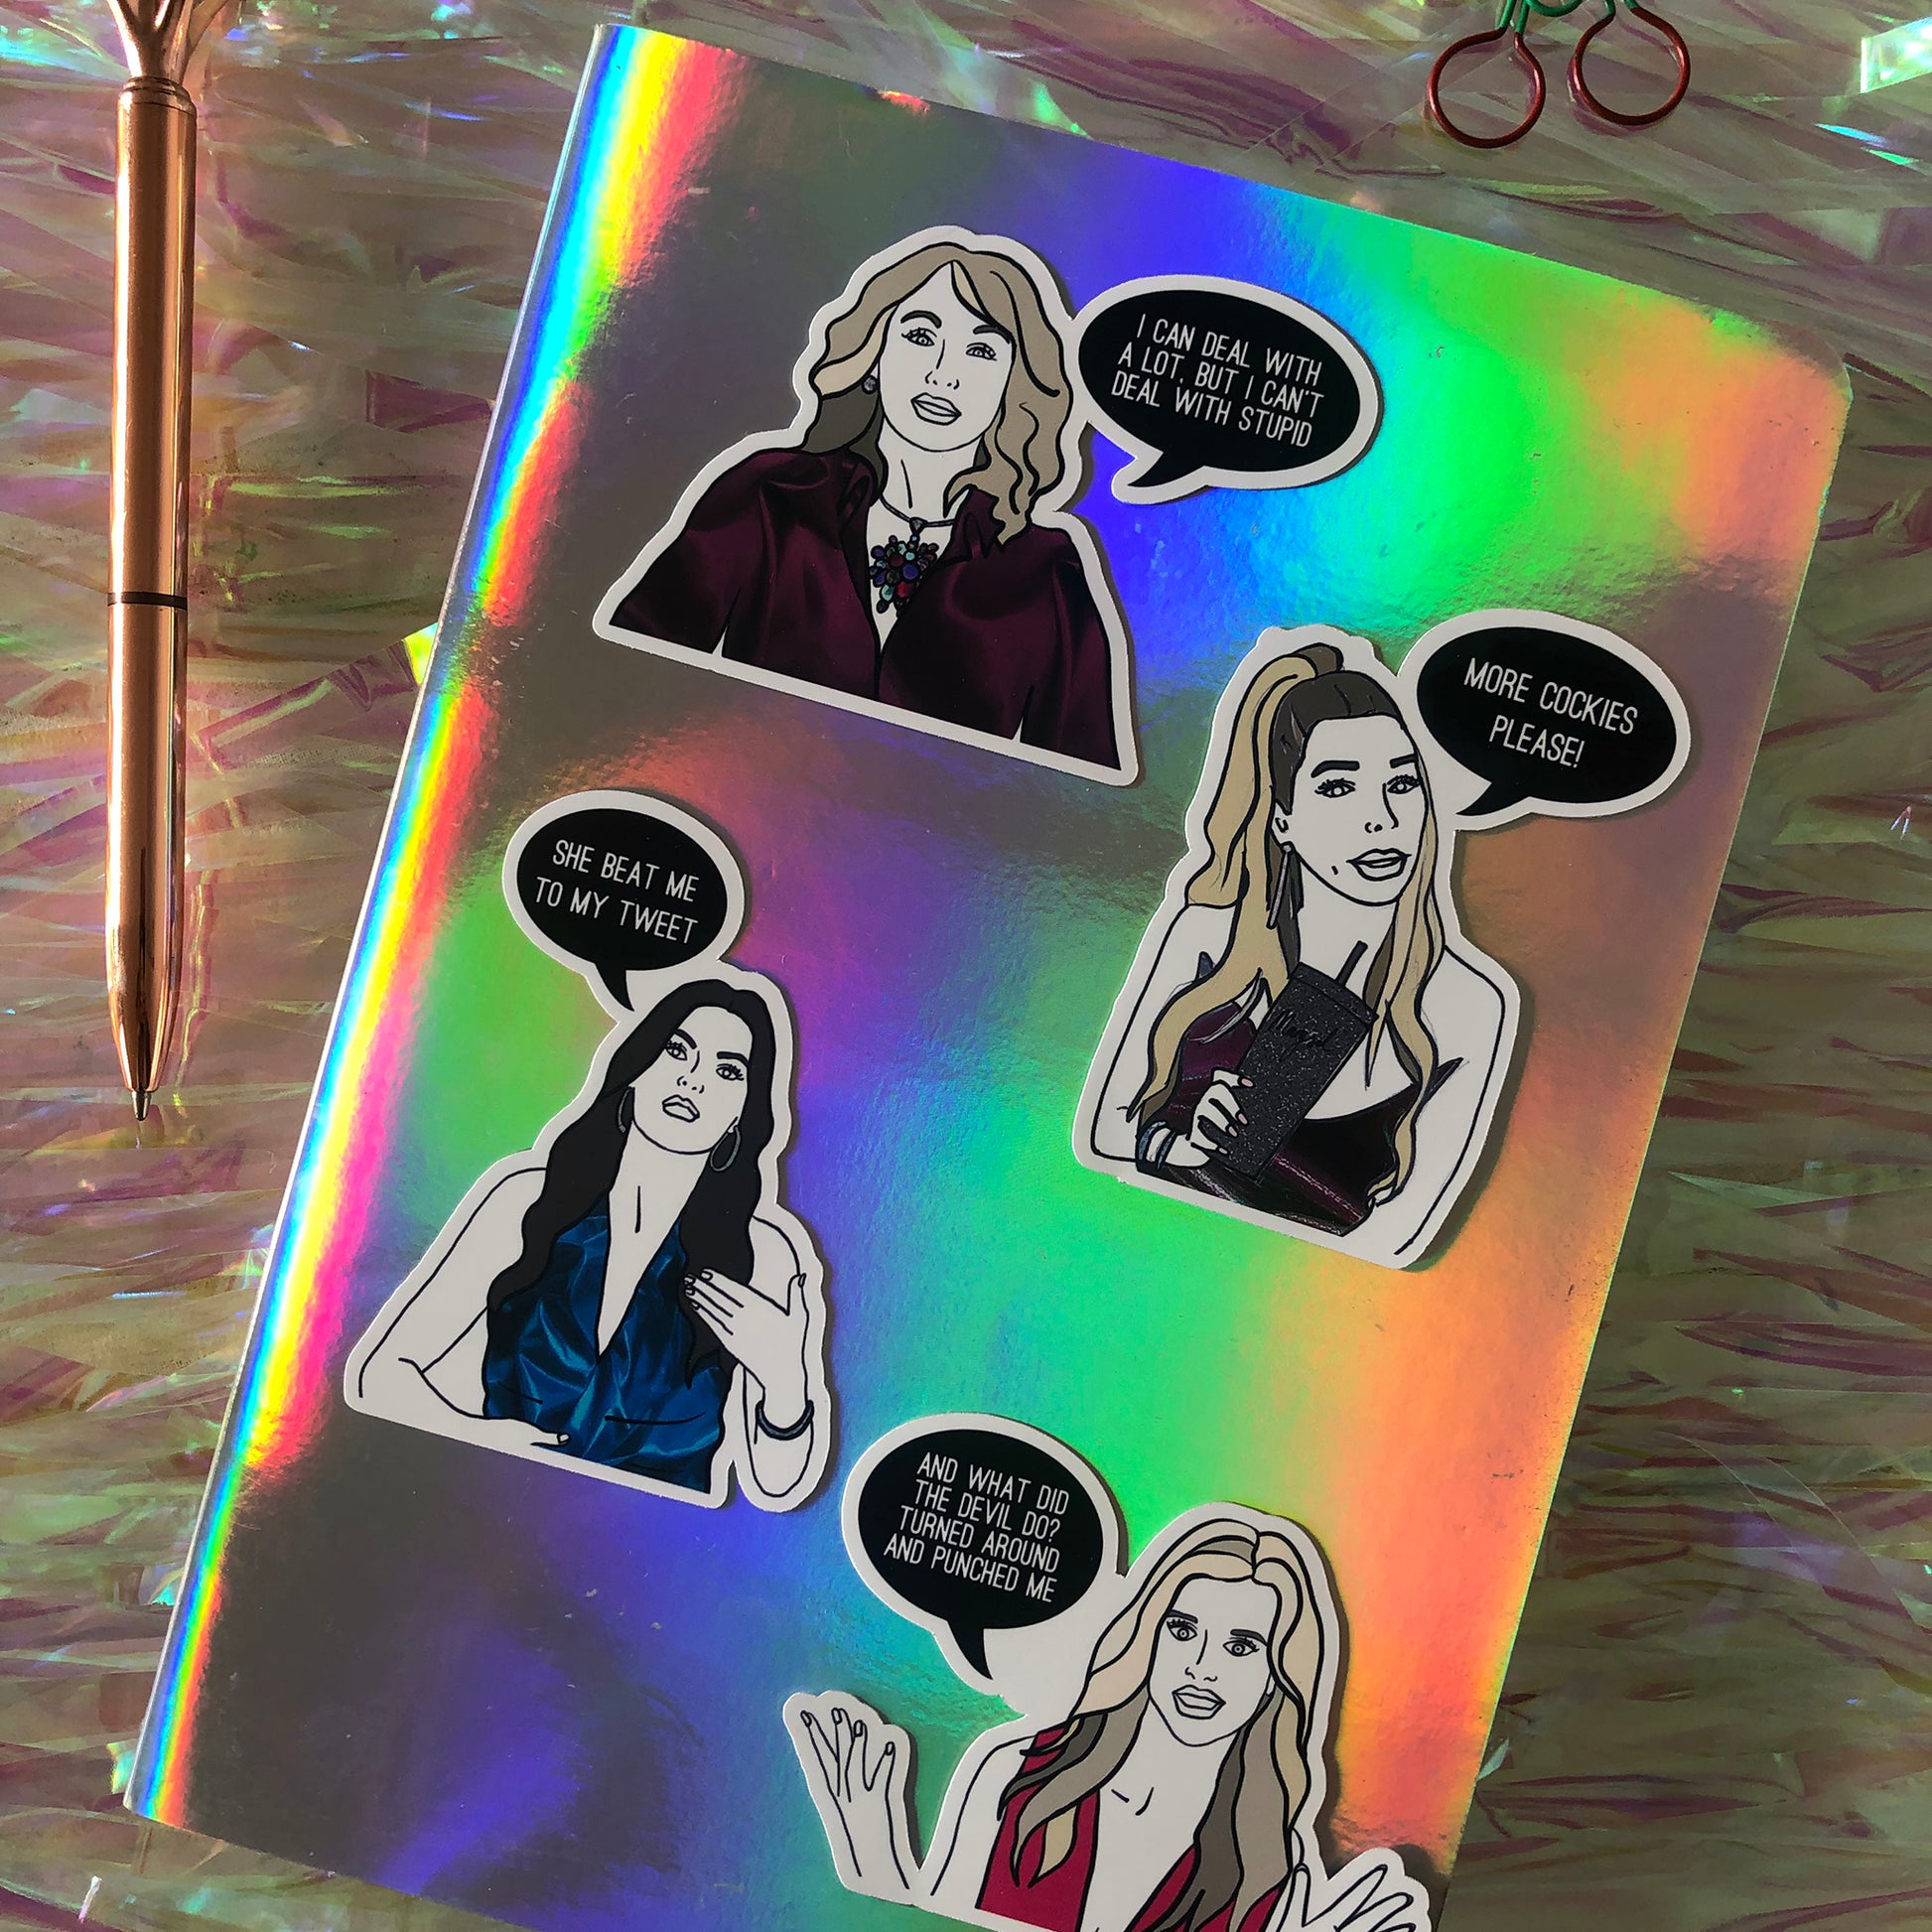 Image shows a fun set of stickers inspired by some of the former real housewives of Miami and their most dramatic quotes